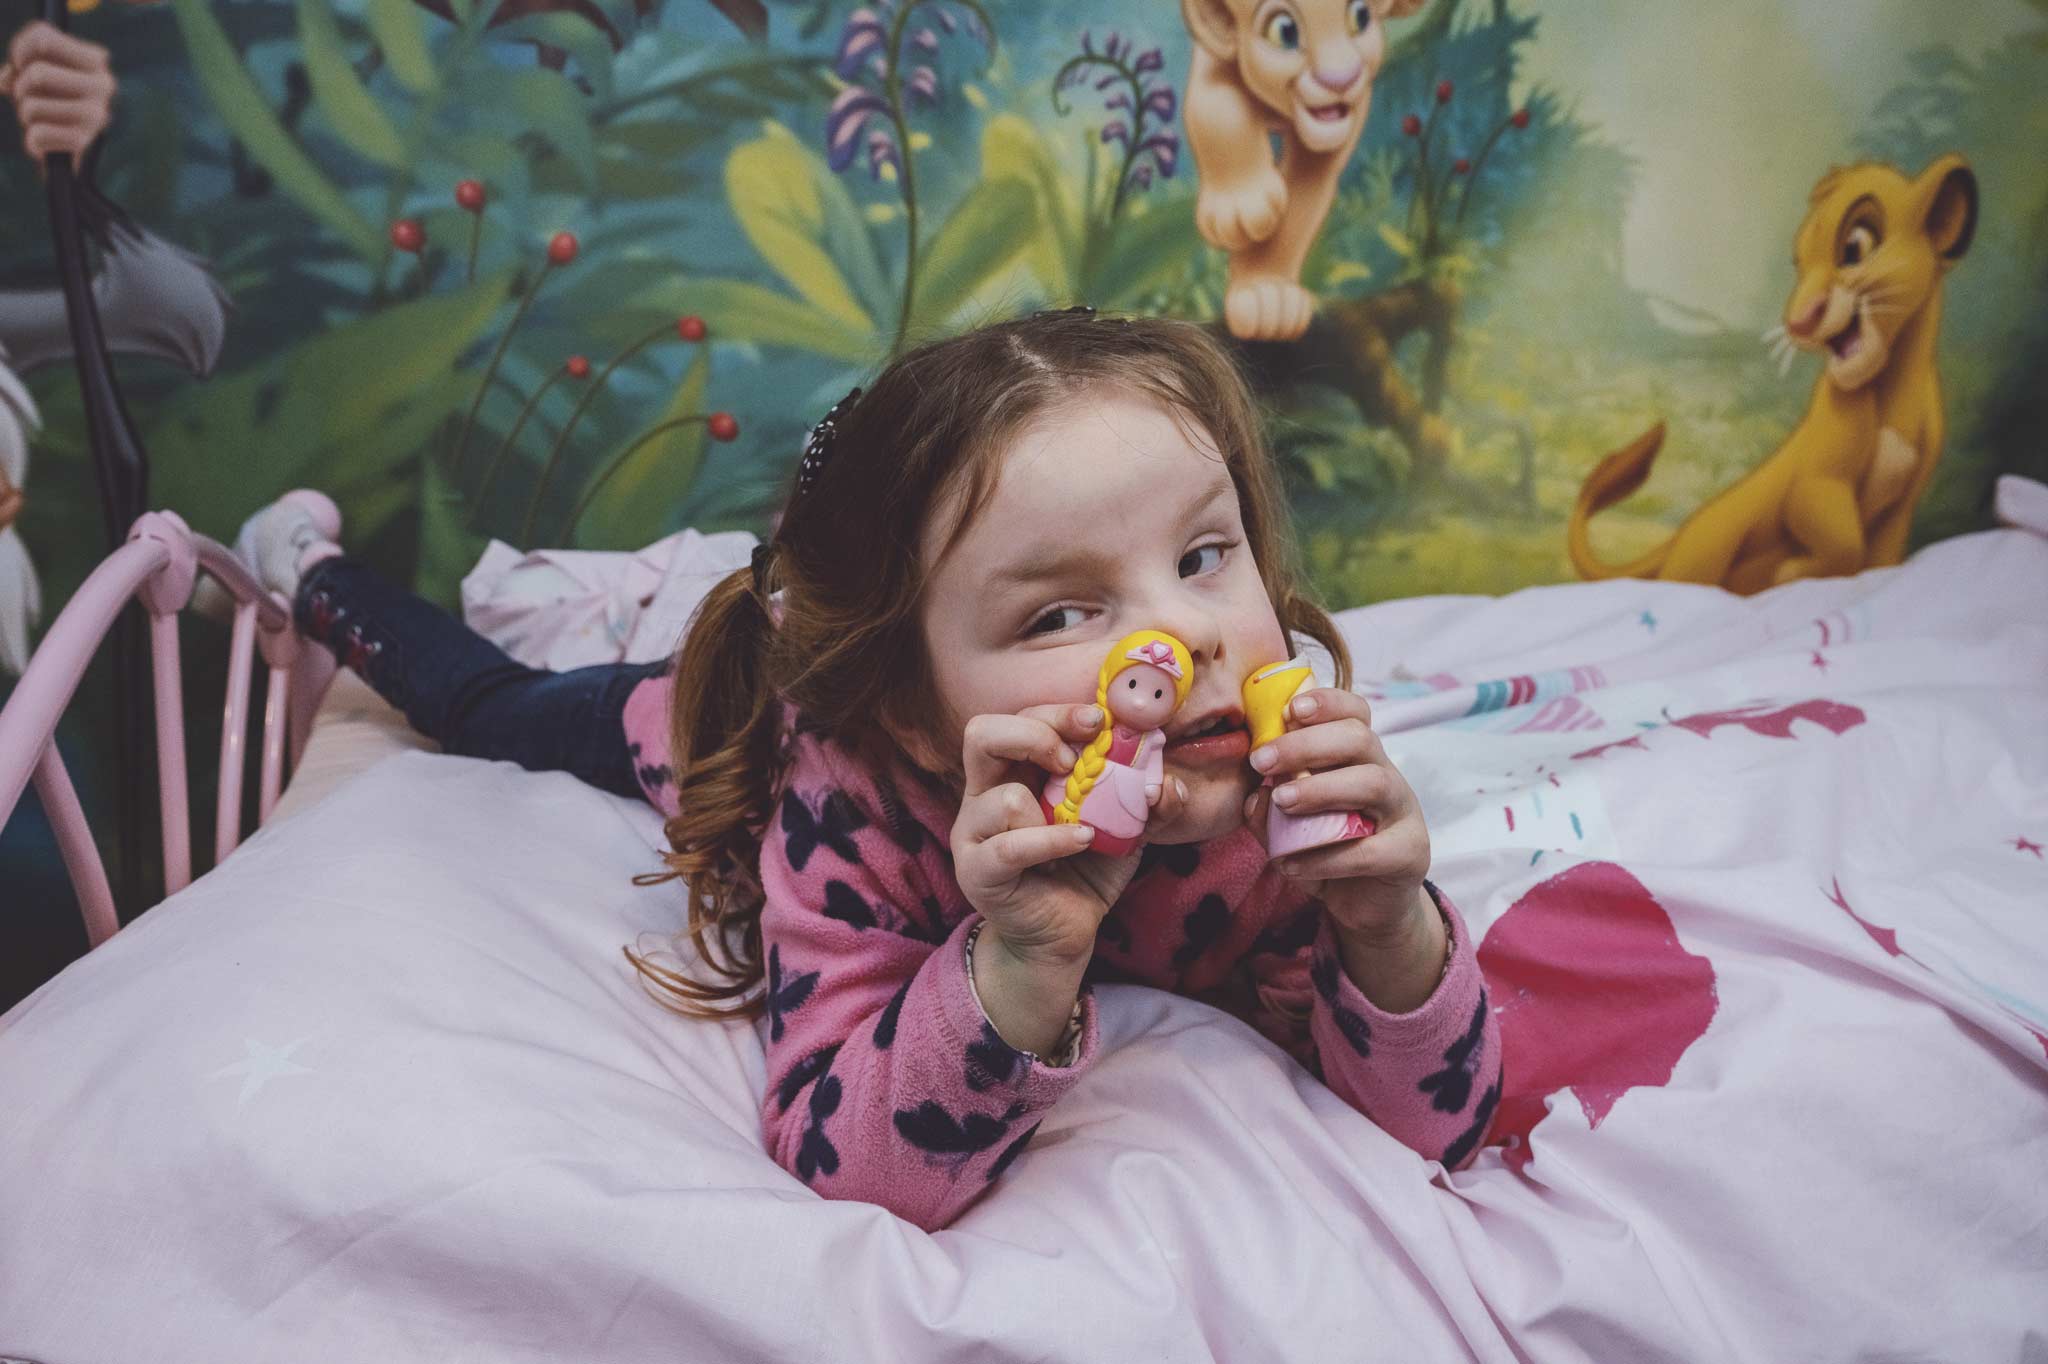 Grandaughter poses for Plymouth Photographer wiht toy up nose